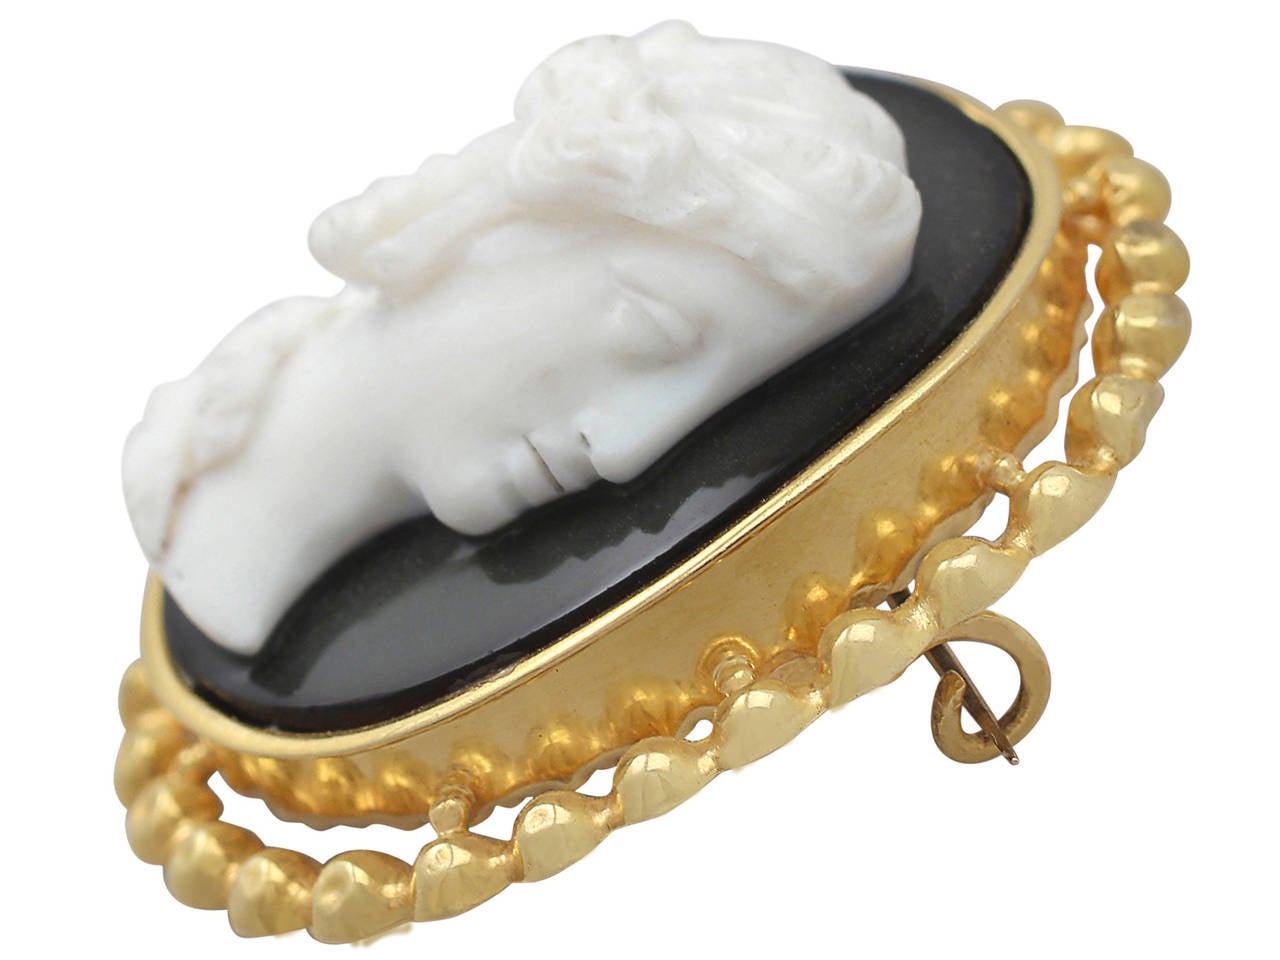 Cameo Brooch / Pendant in 18k Yellow Gold - Antique French Circa 1880 1